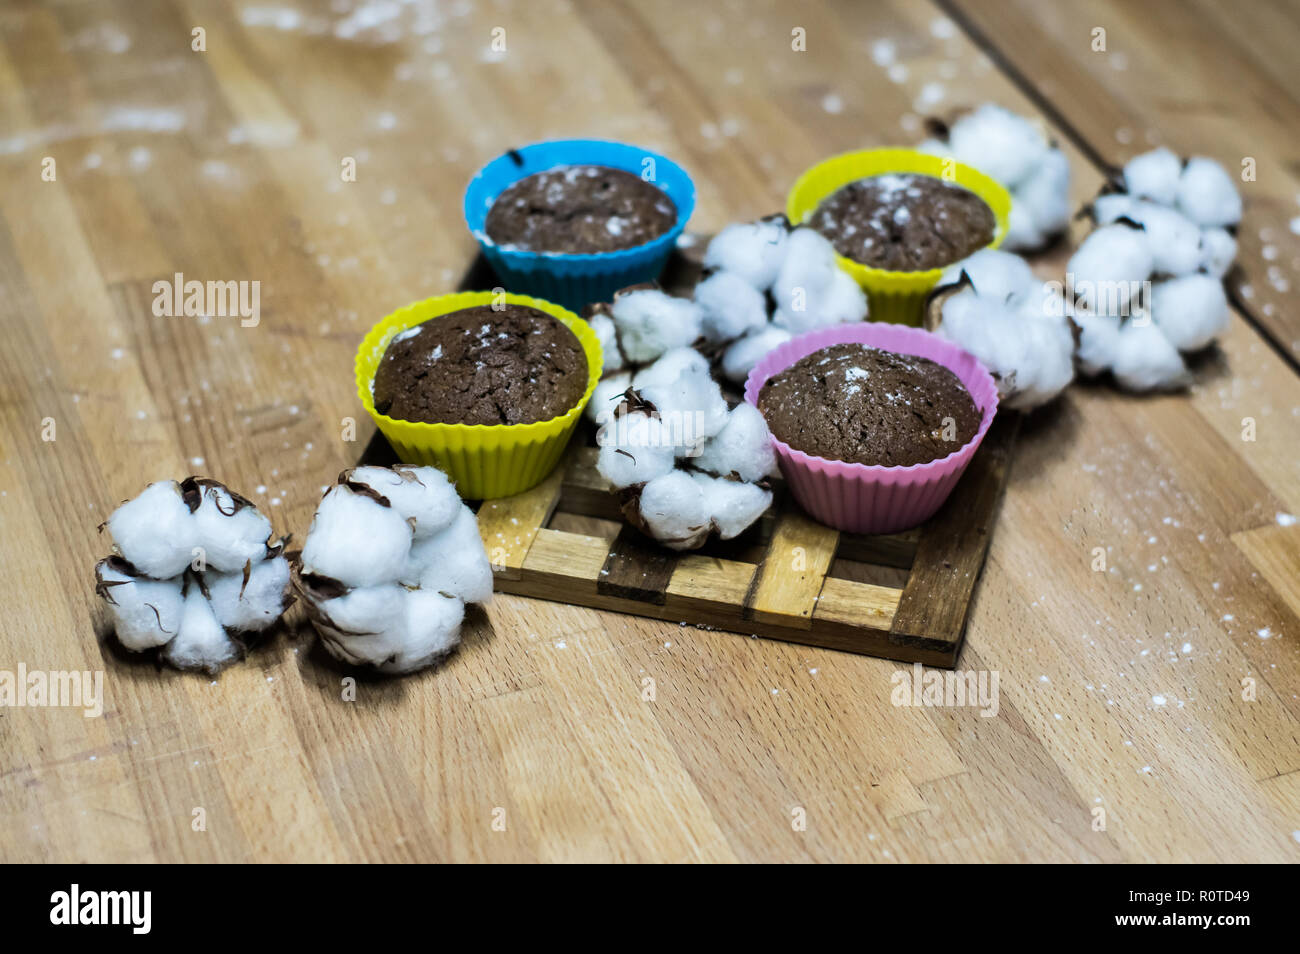 Chokolate cupcakes with powder on the wooden table with cotton Stock Photo